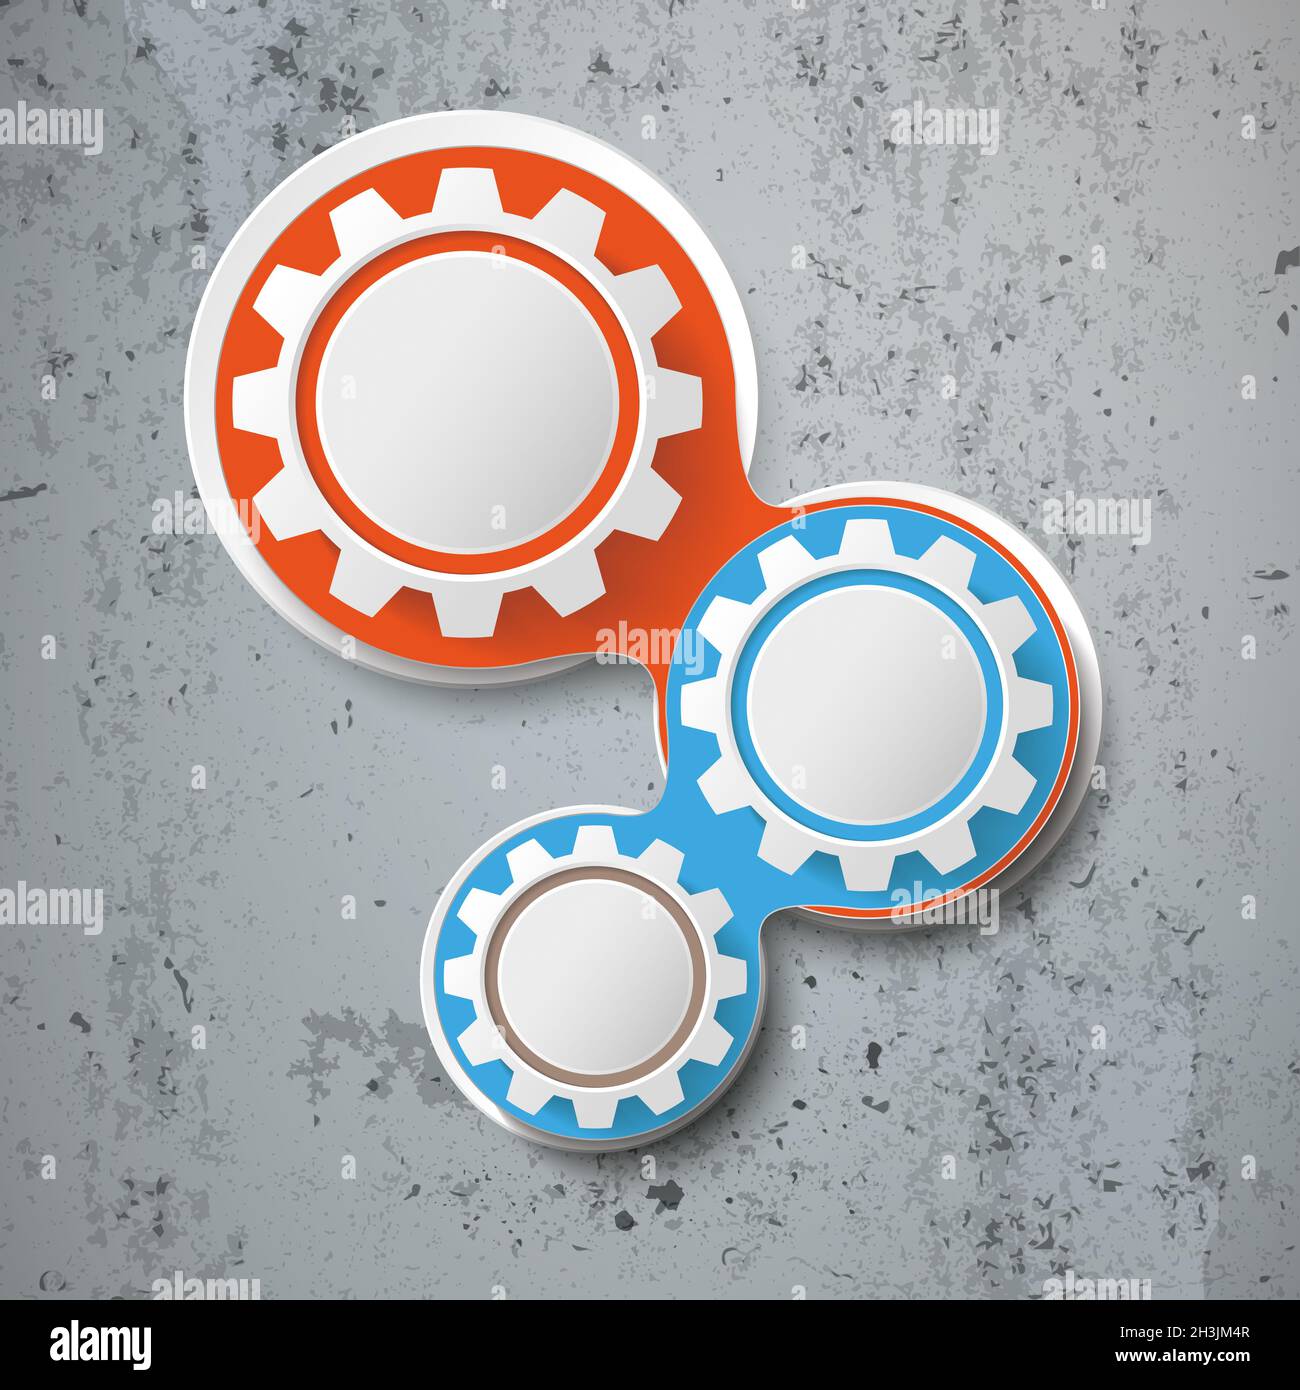 Infographic Chains White 3 Gears Concrete PiAd Stock Photo